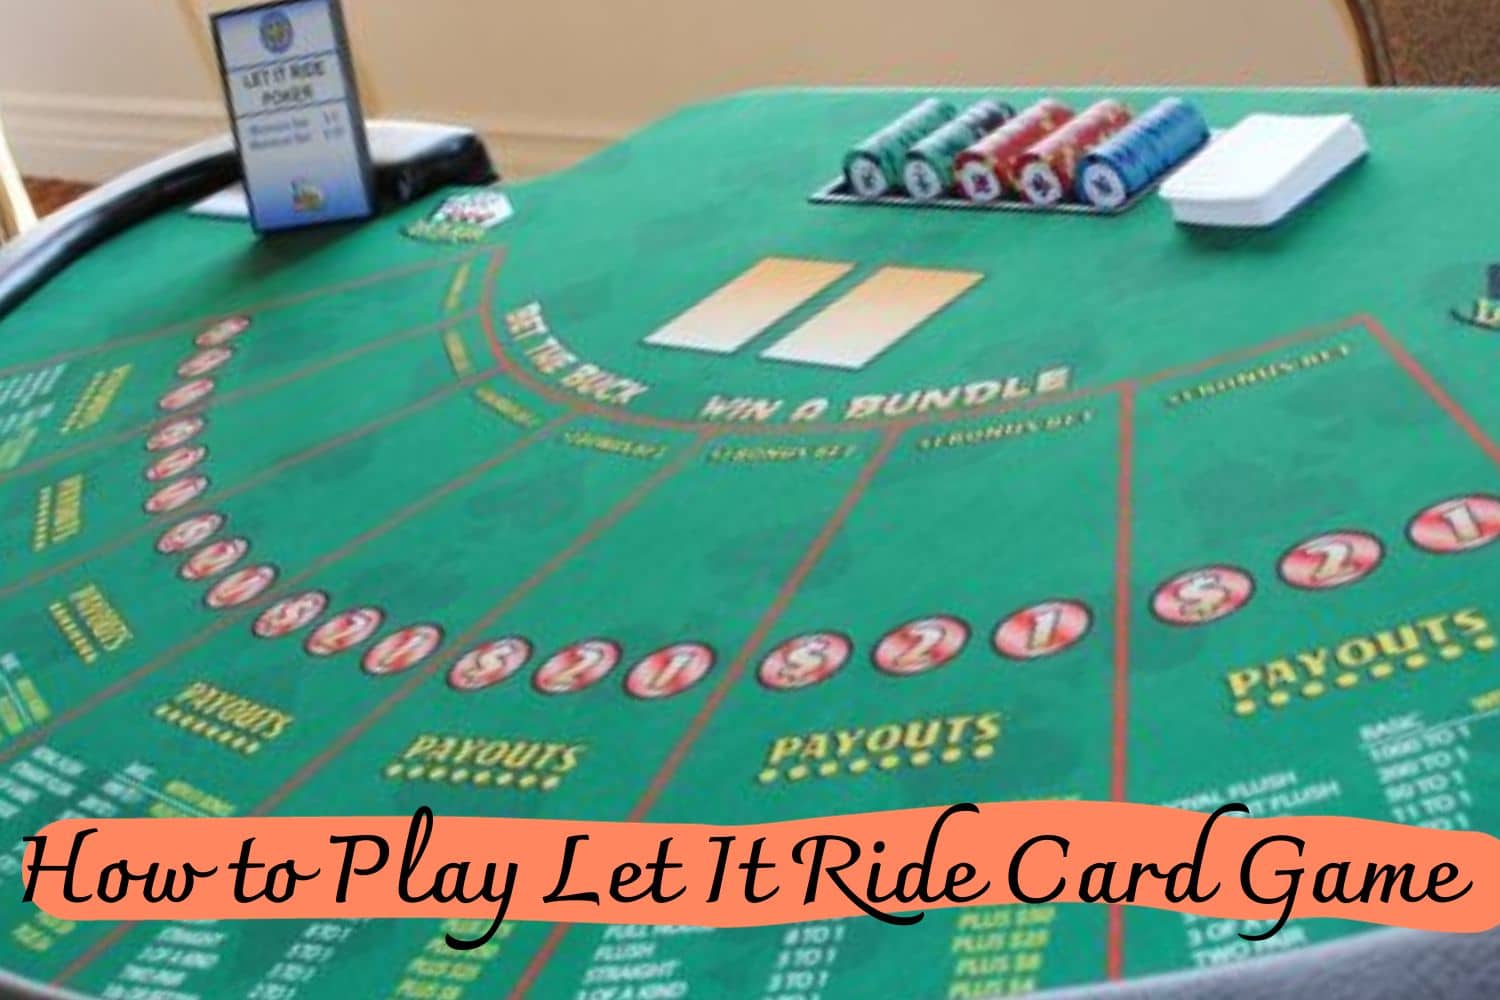 How to Play Let It Ride Card Game